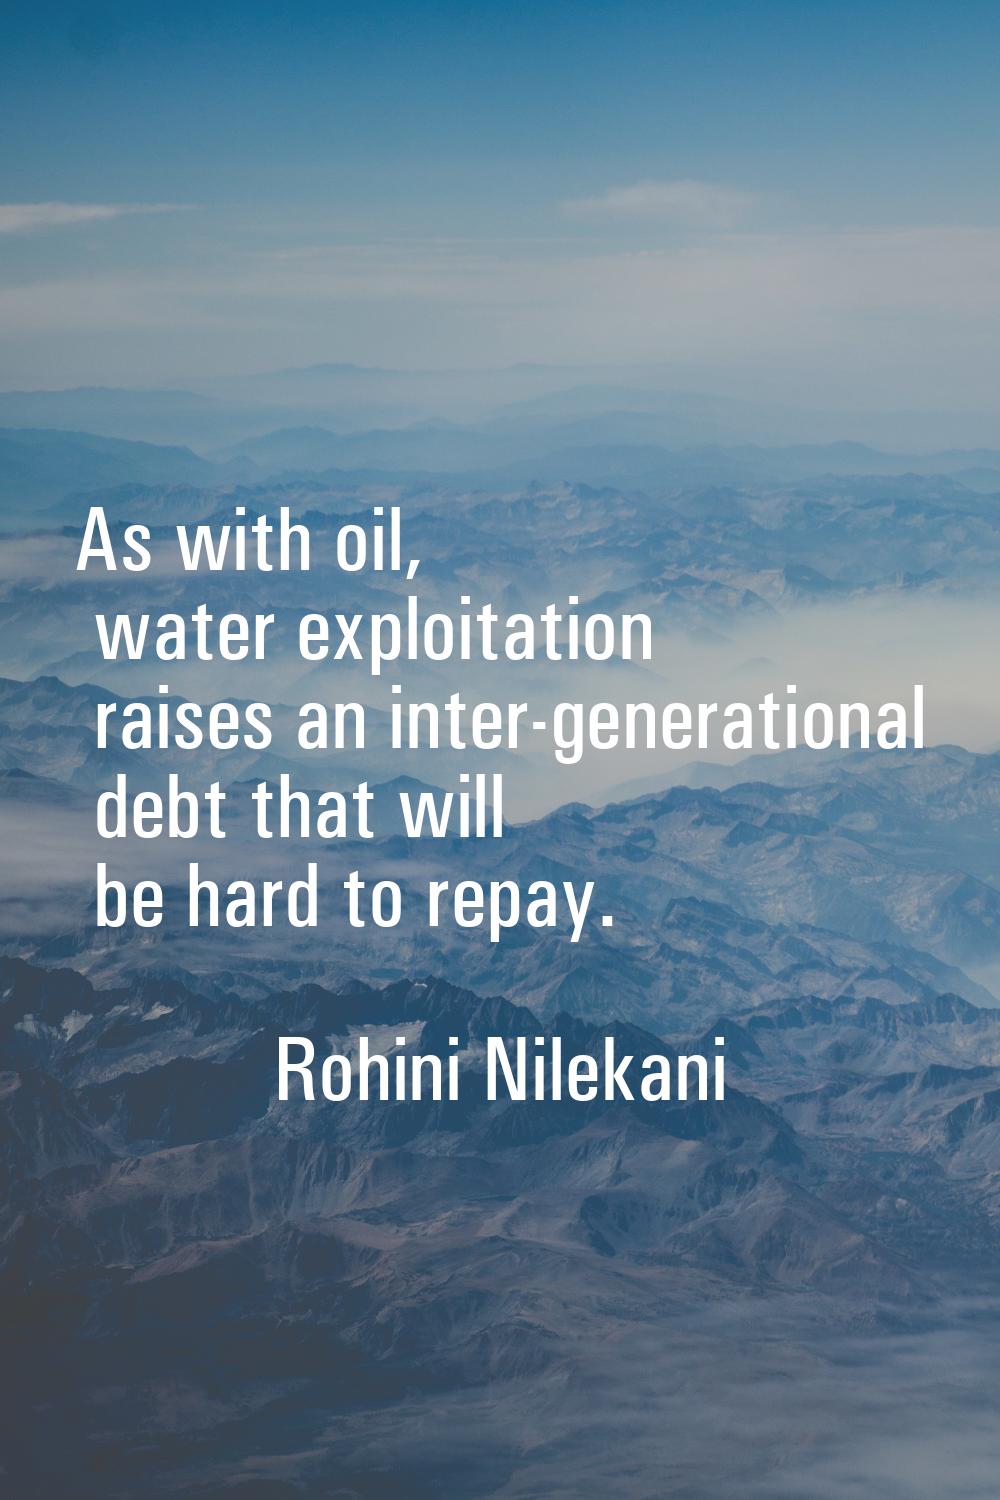 As with oil, water exploitation raises an inter-generational debt that will be hard to repay.